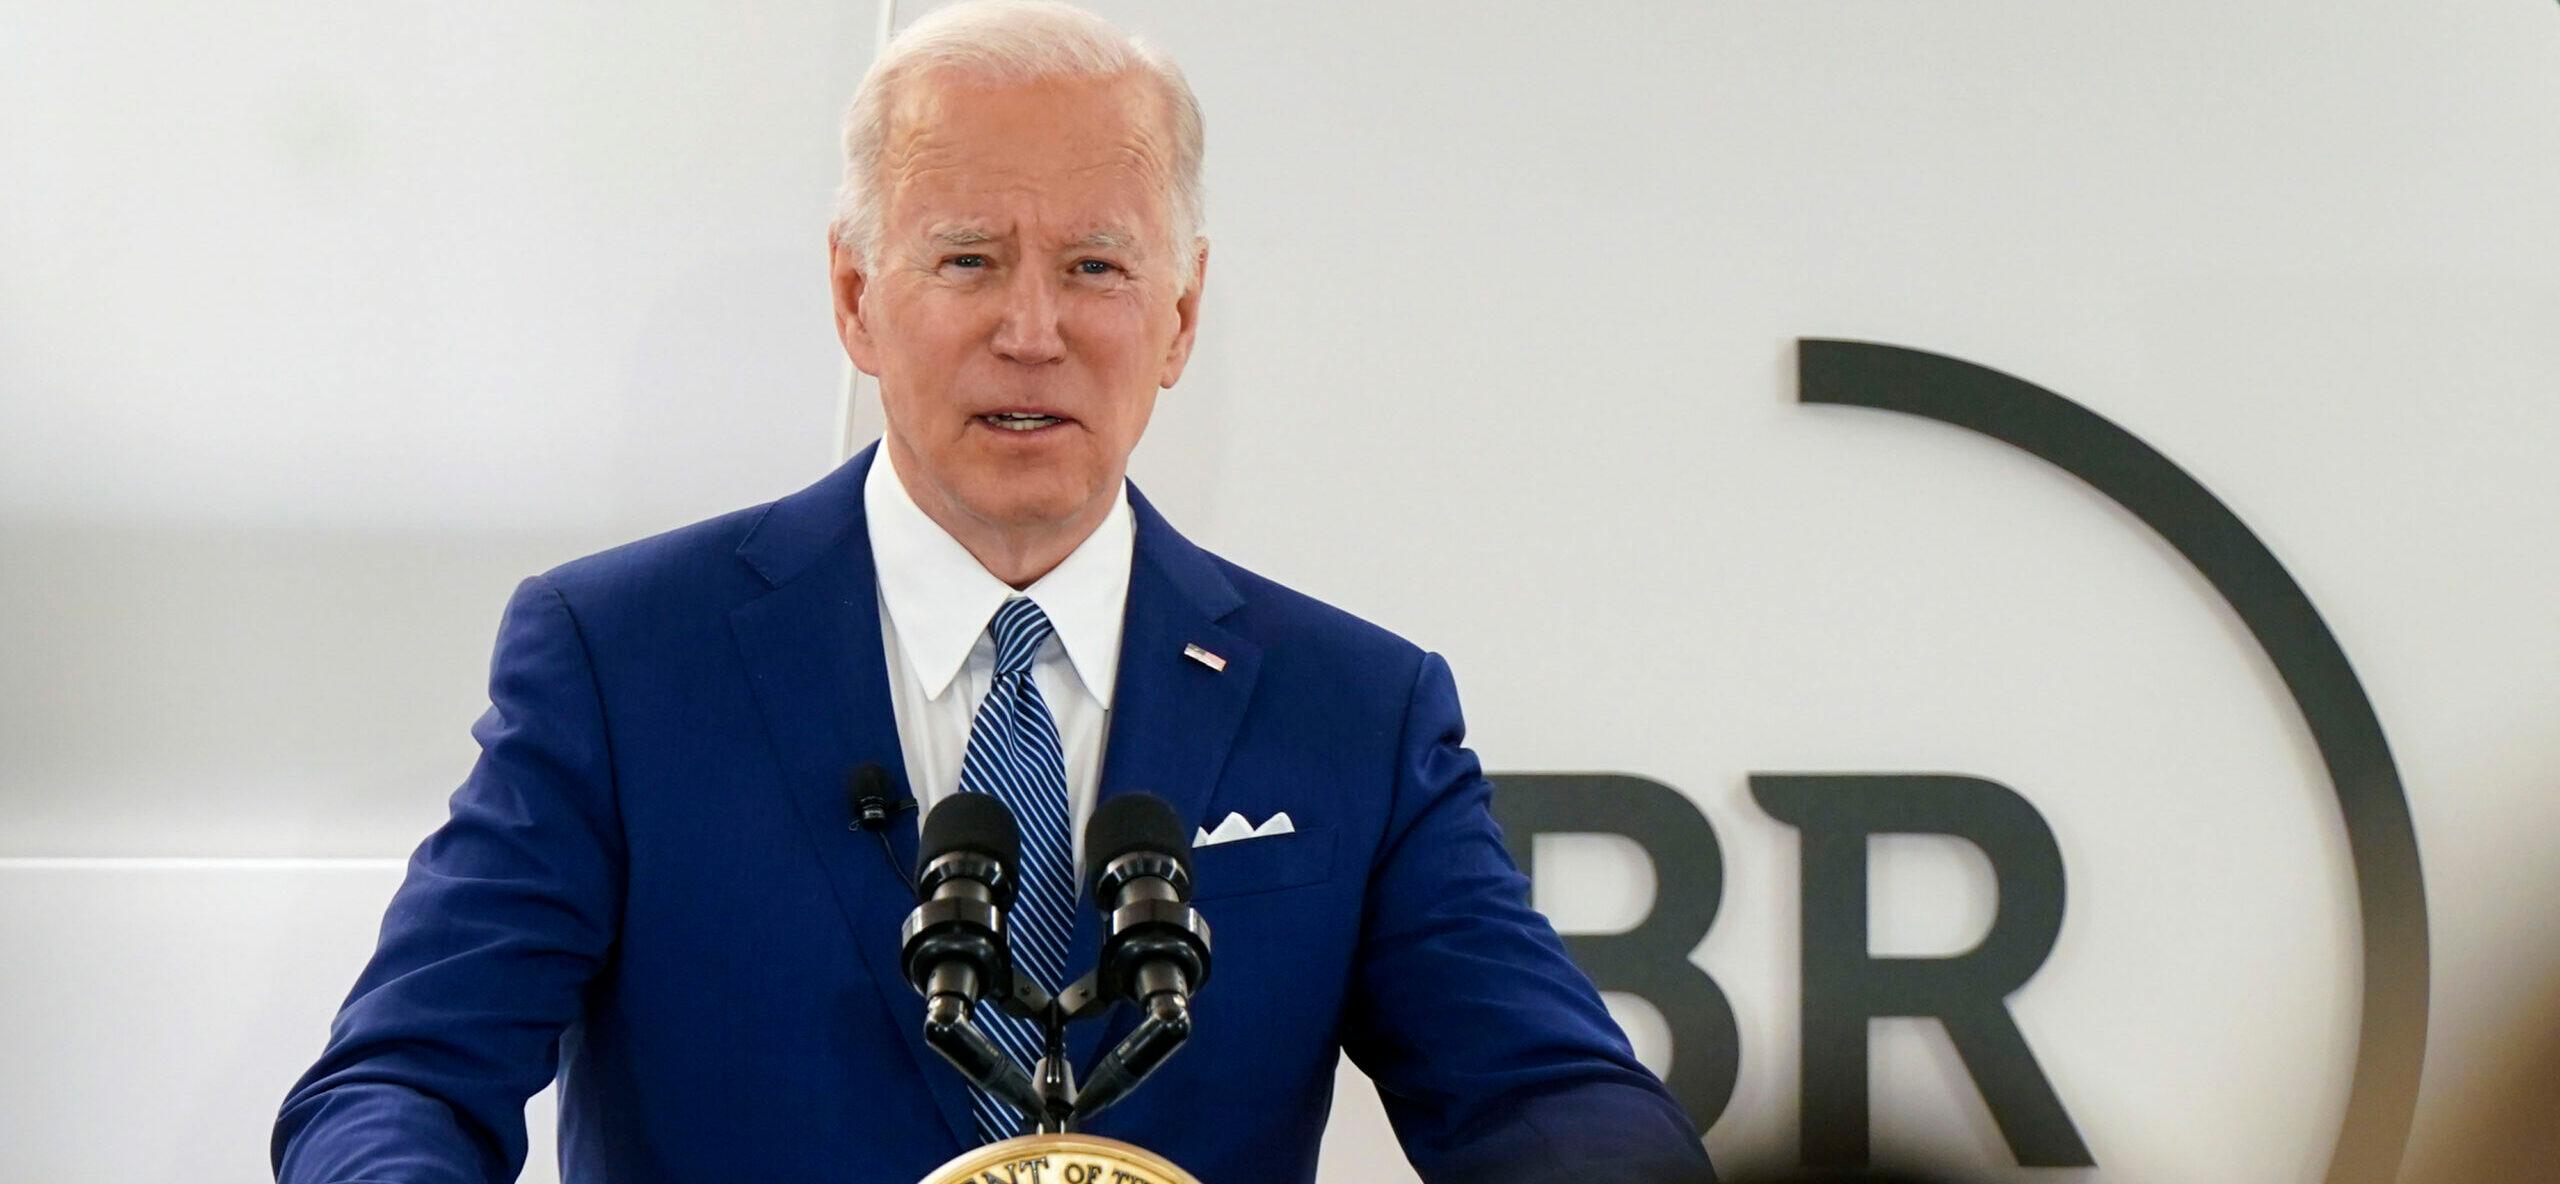 Biden Joins Business Roundtable CEO Meeting